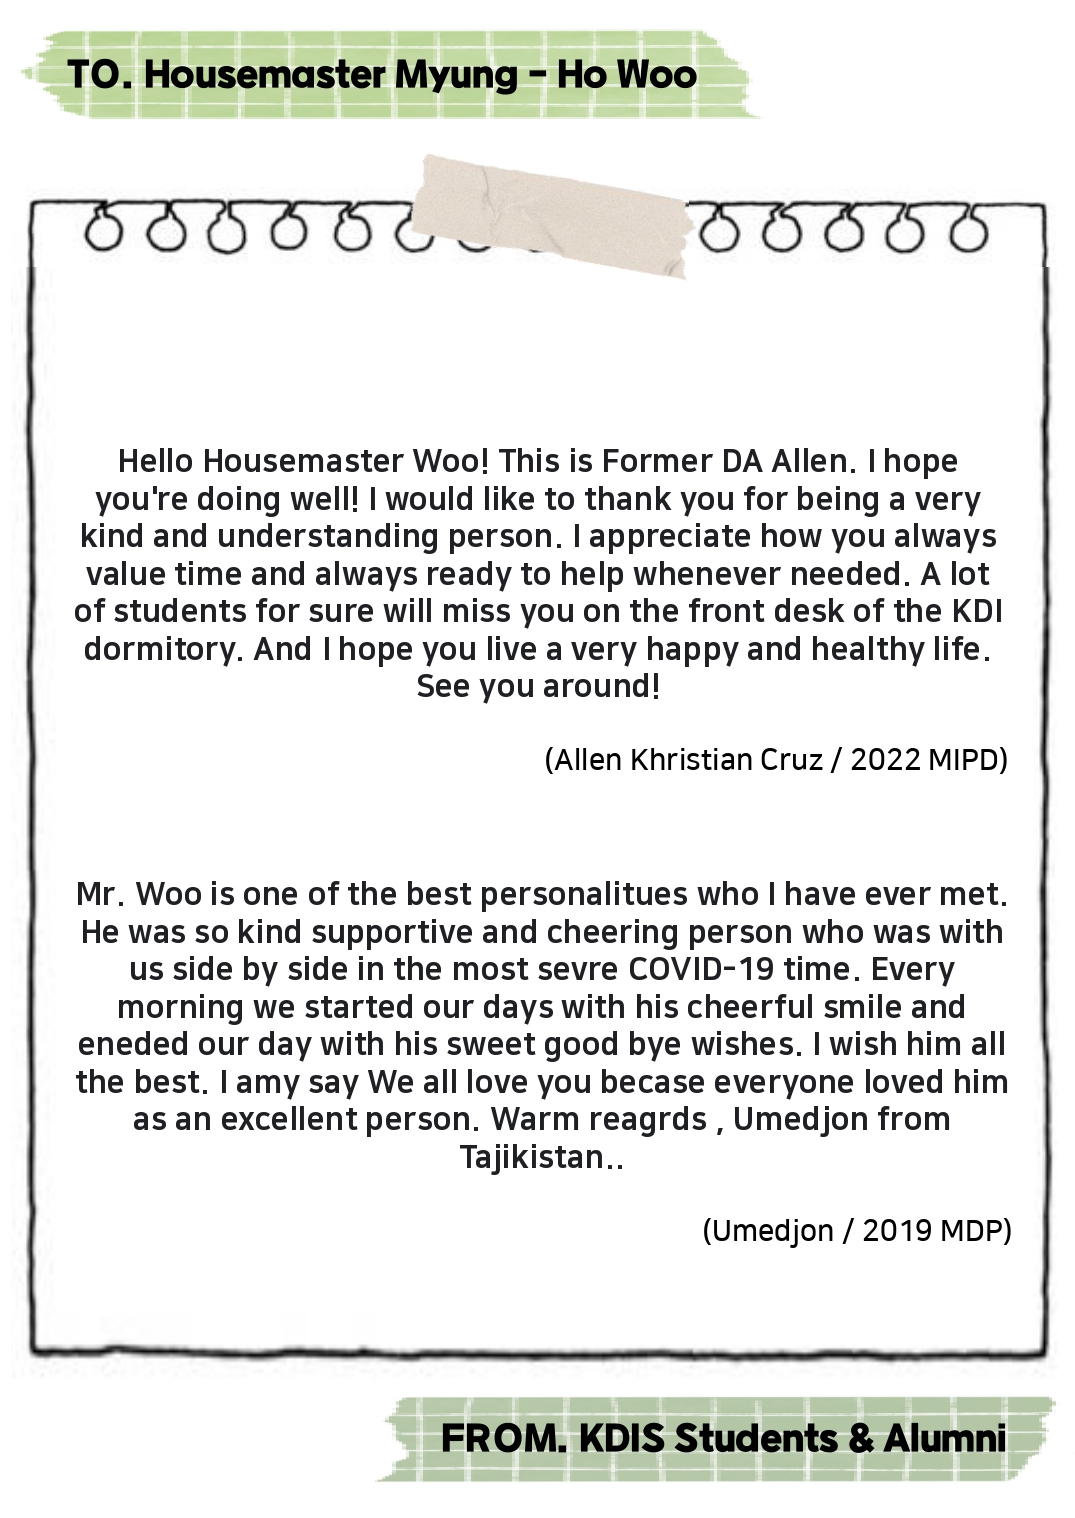 Thank you Housemaster Myung-ho Woo -Messages from KDIS Students and Alumni 사진33